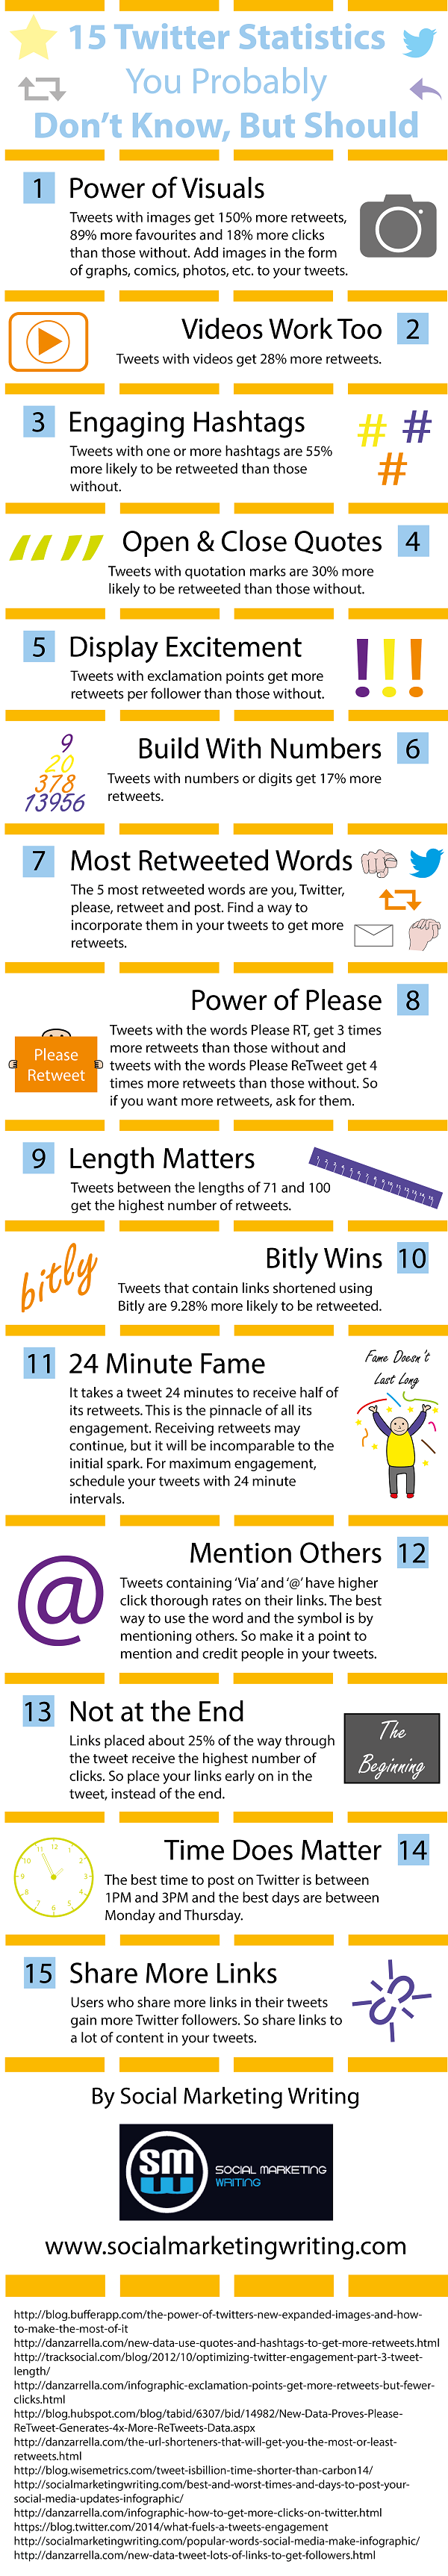 15 Twitter Statistics You Probably Don’t Know, But Should [Infographic]